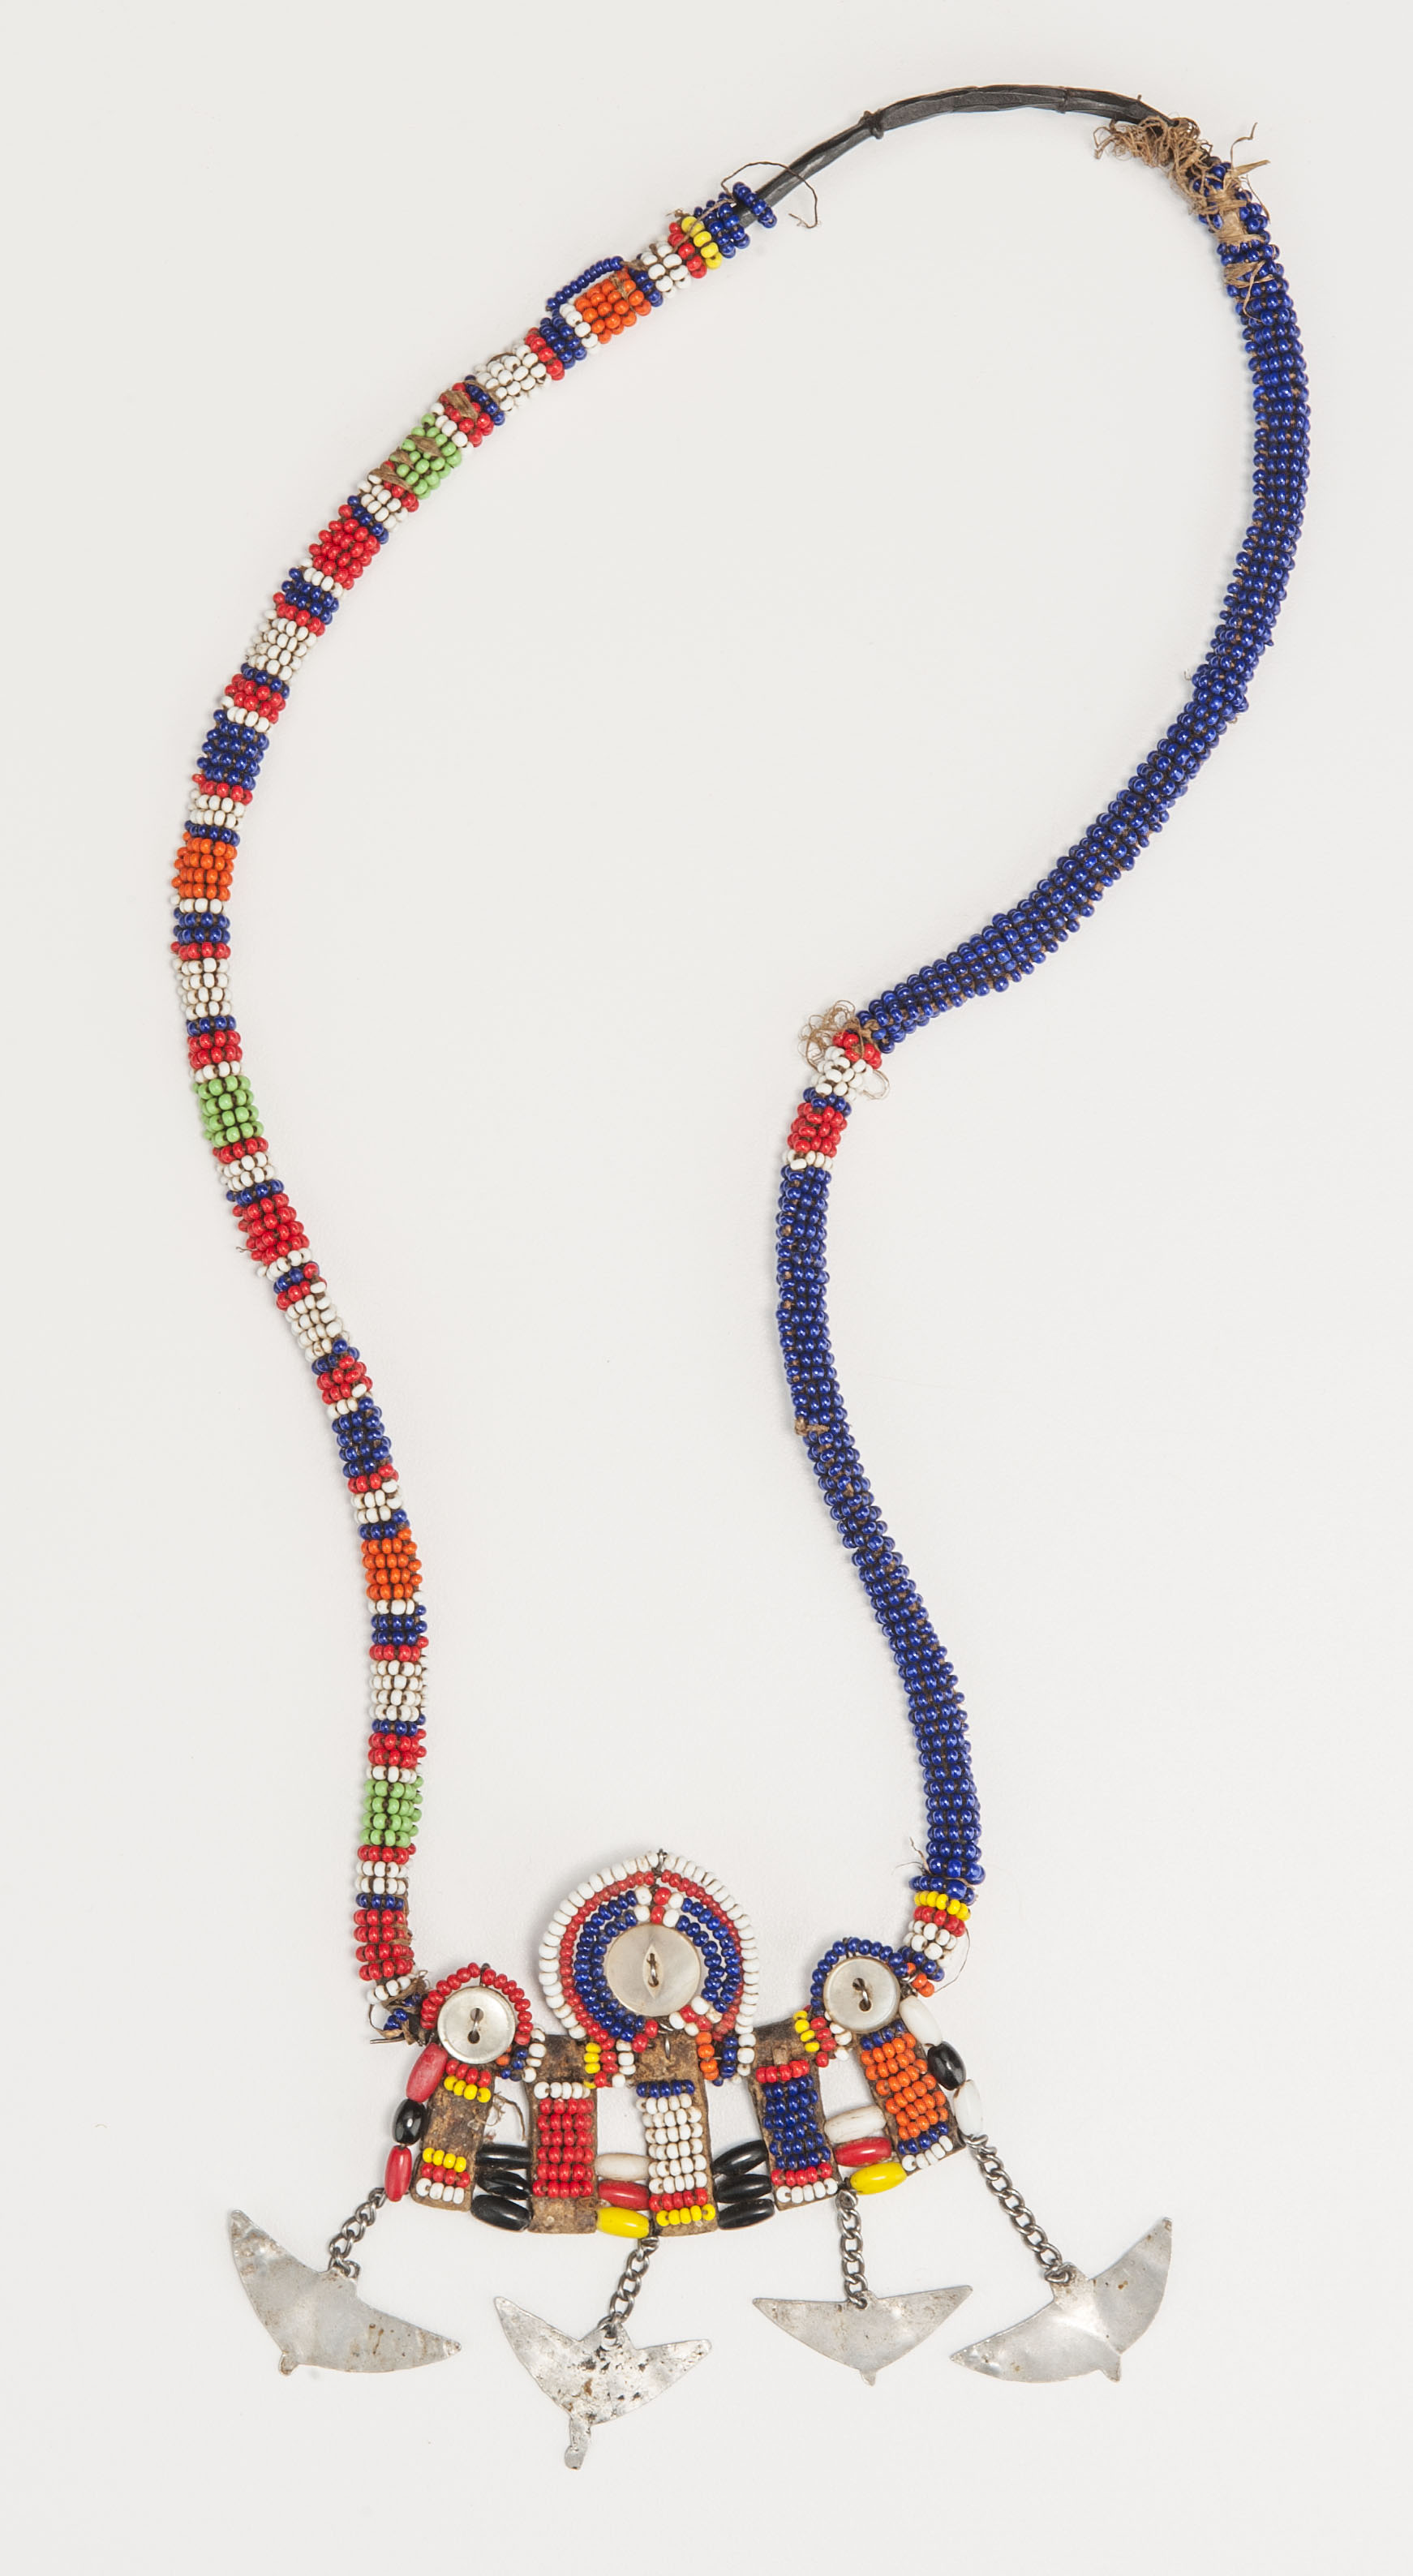 Man’s Necklace by Unknown Artist - collected in Wamba in the 1970s - 36.8 x 13.7 cm Indiana University Art Museum